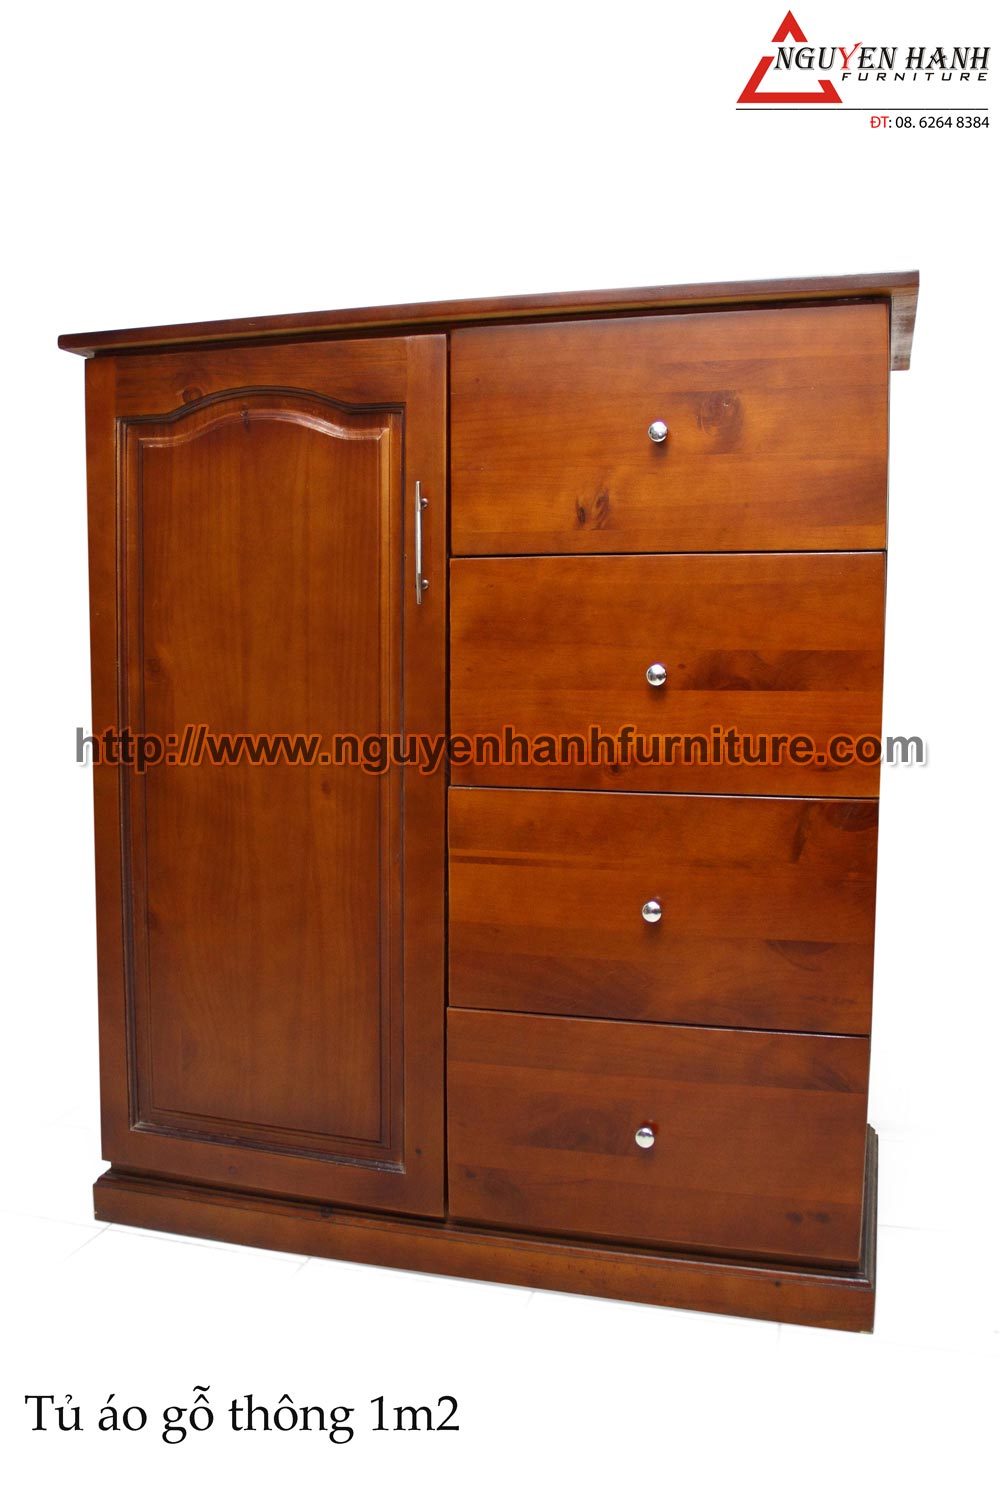 Name product: T1m2 brown Wardrobe with drawers- Dimensions: 50 x 100 x 126cm - Description: Natural pine wood